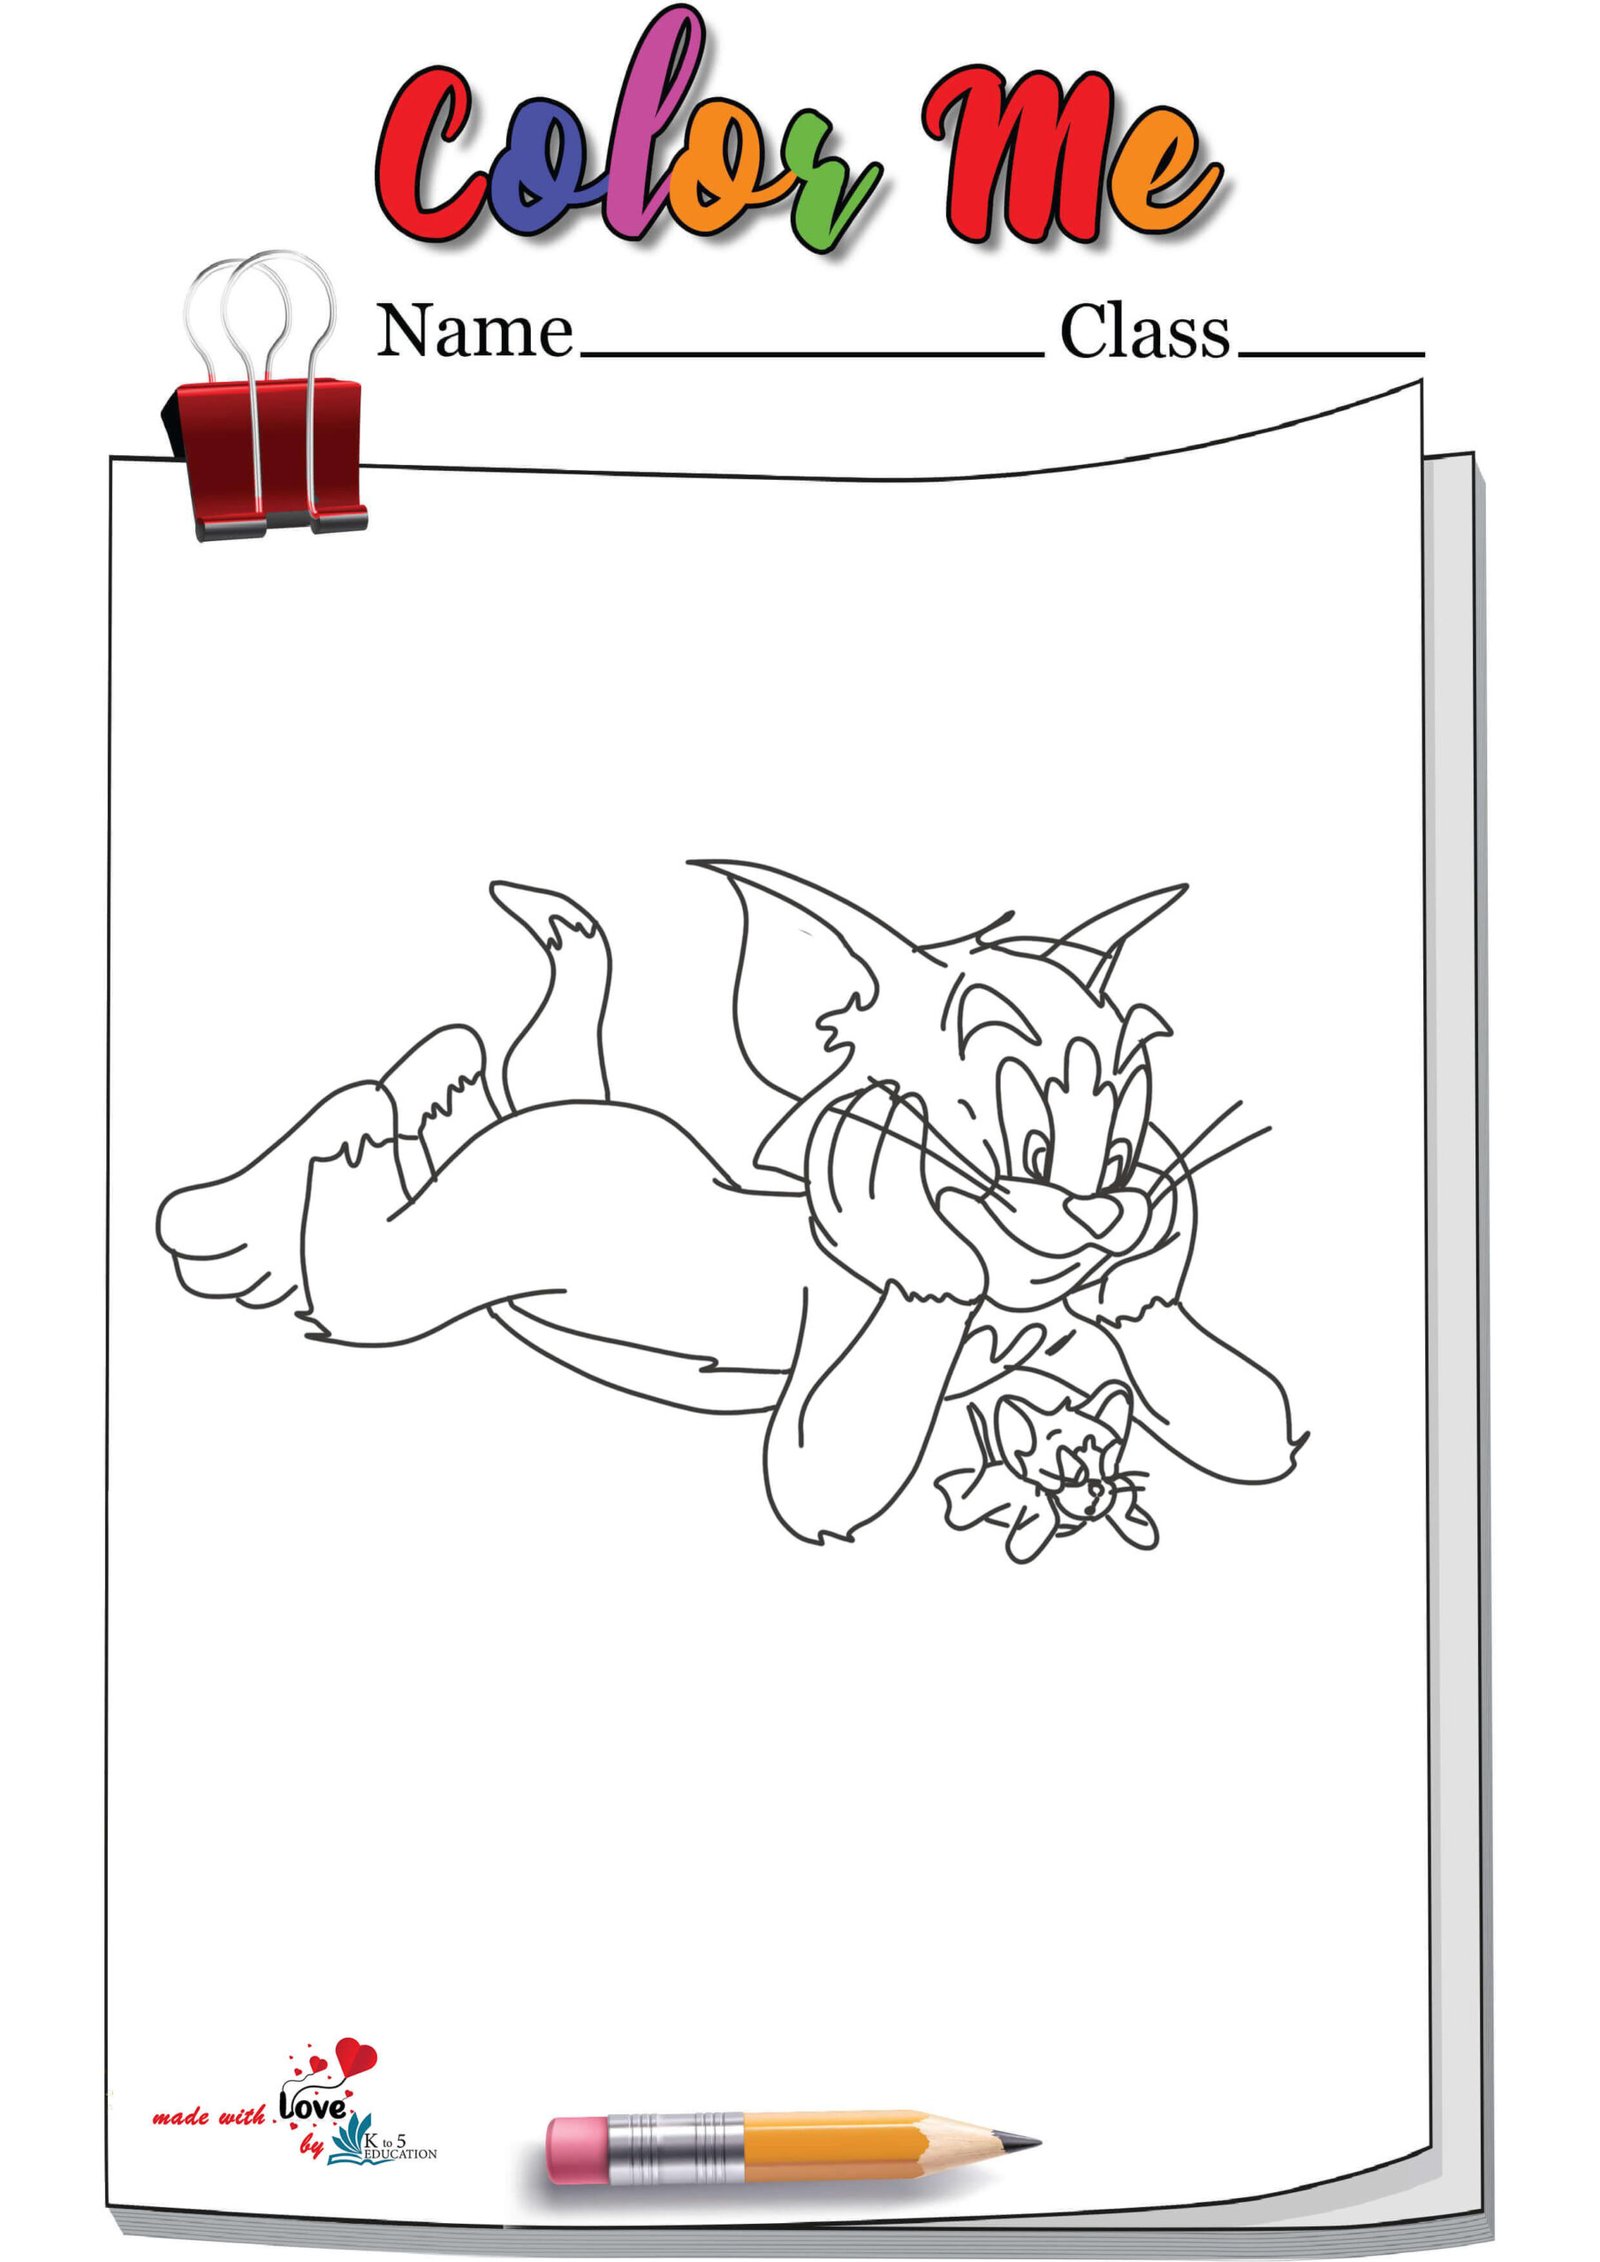 Sitting Tom And Jerry Coloring Page